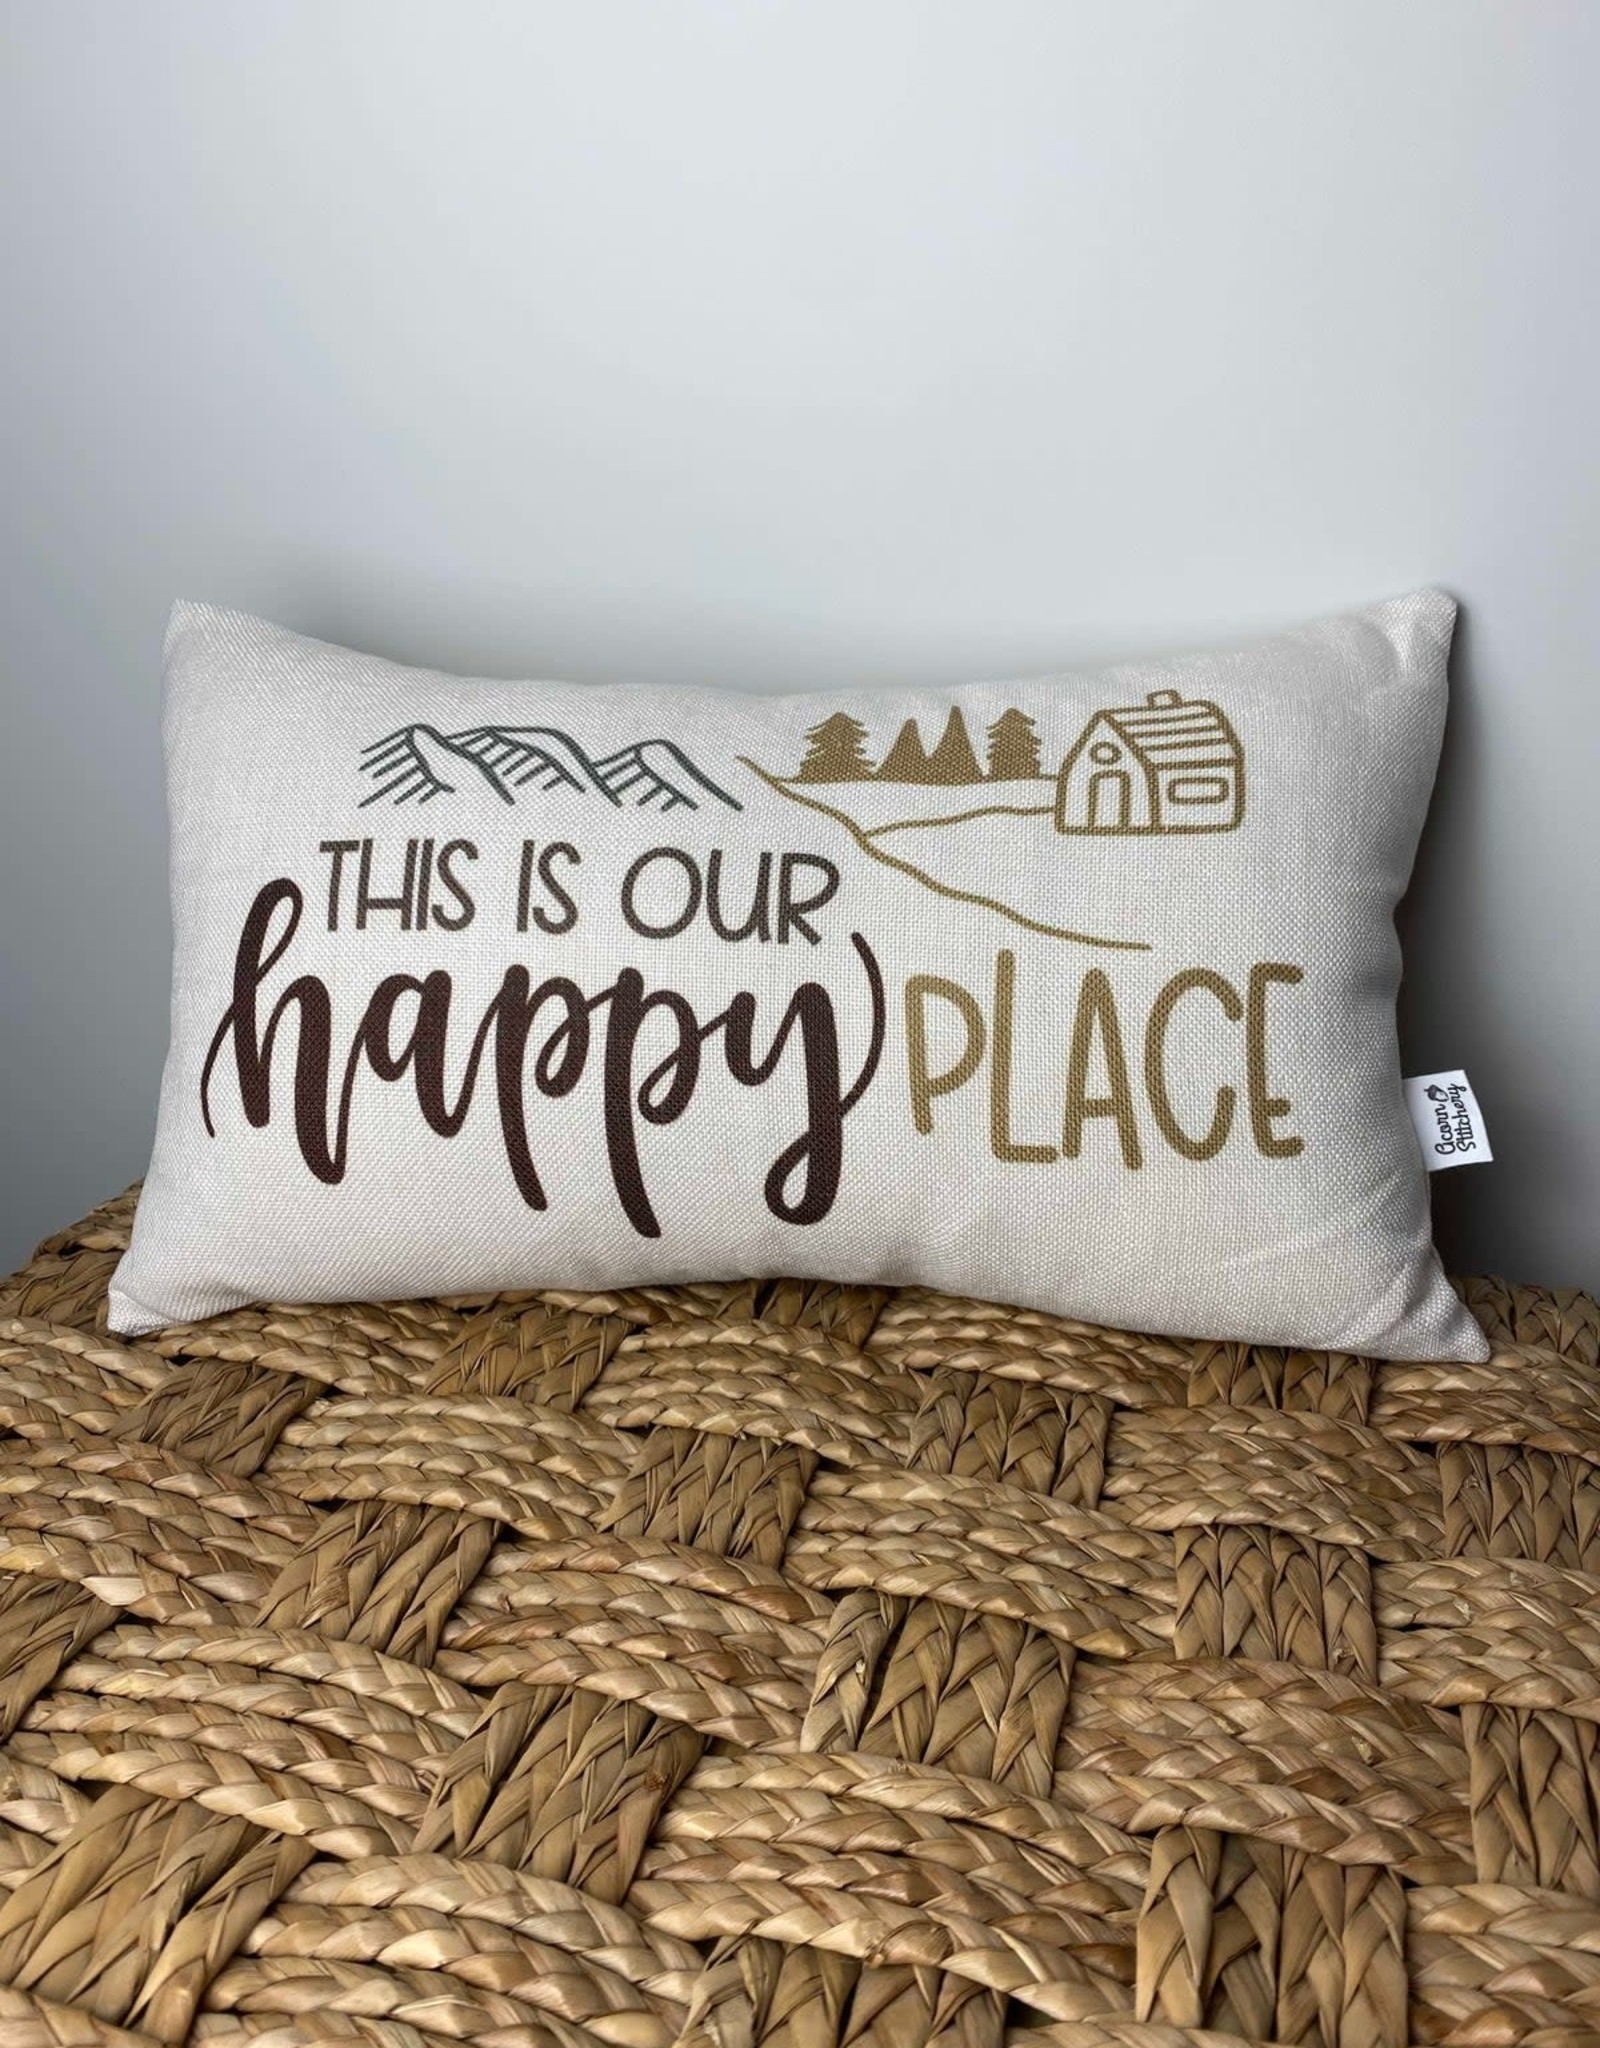 This Is Our Happy Place pillow